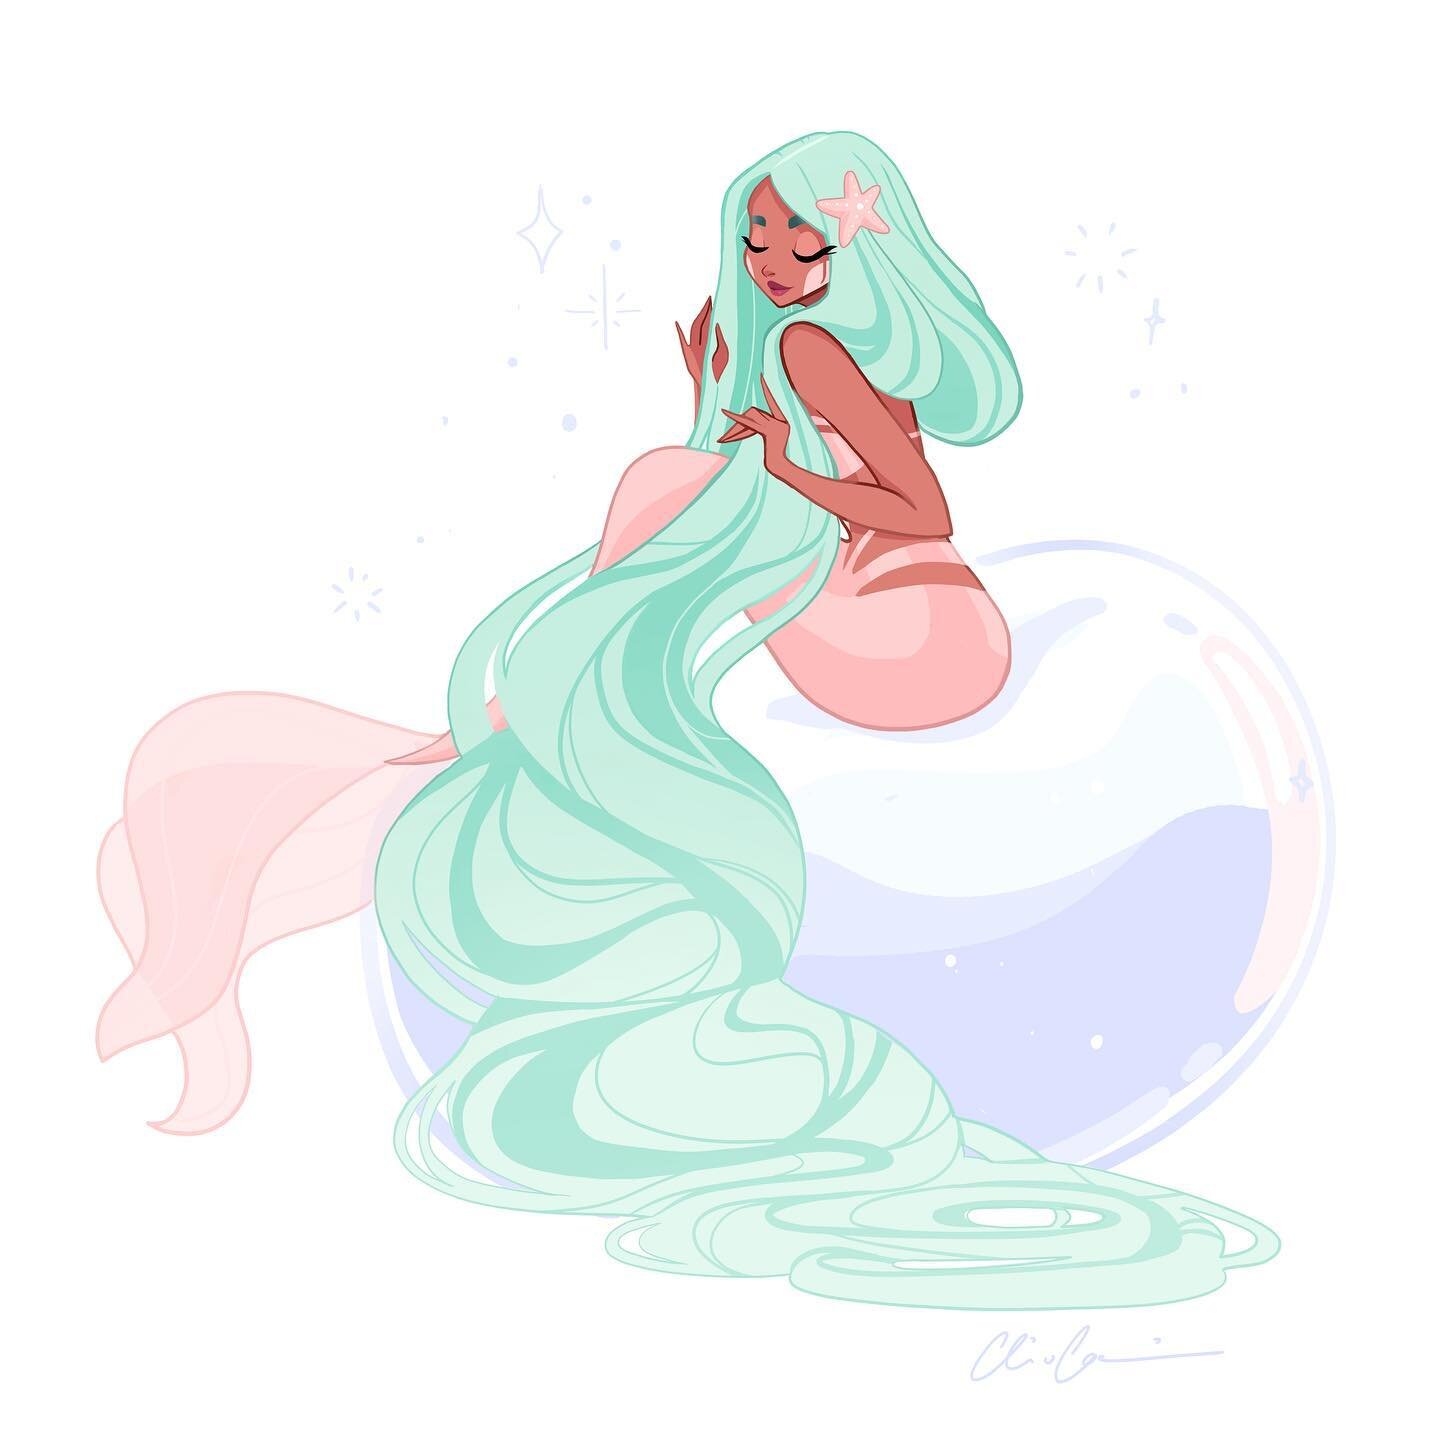 𝑀𝒾𝓃𝒾 𝒷𝓊𝒷𝒷𝓁𝑒 𝓂𝑒𝓇𝓂𝒾𝑒
&bull;
Here&lsquo;s another mini Mermie! Mint is such a pretty colour and goes really well with pink! 💕
&bull;
I&lsquo;m not sure if I prefer drawing with lineart or not - it makes some parts of the illustration ea